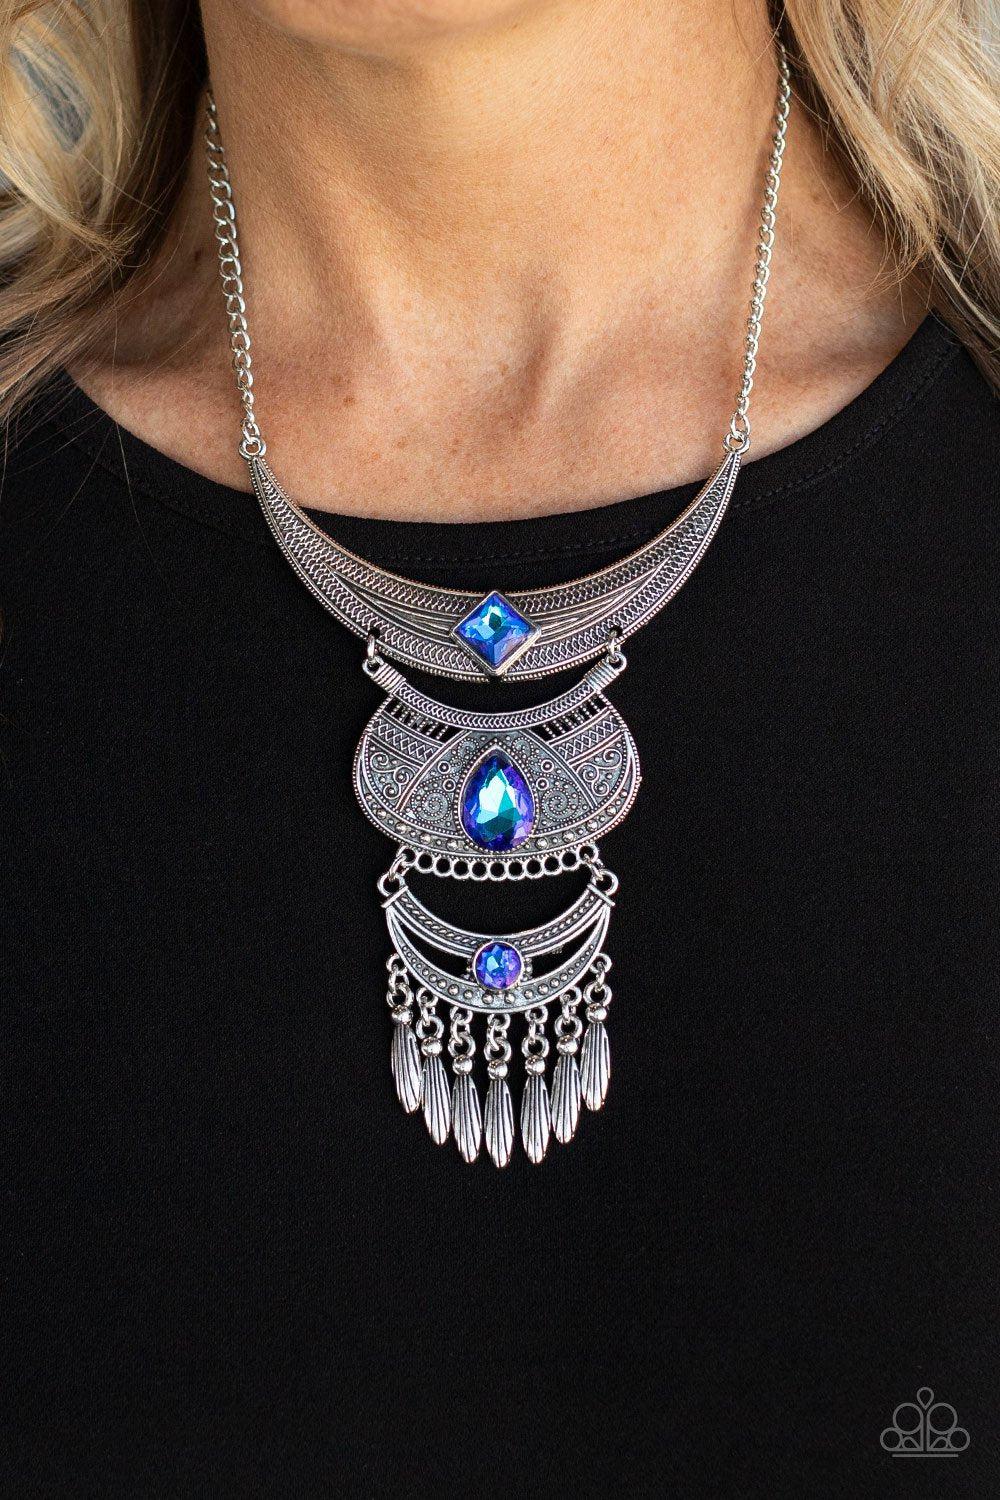 Lunar Enchantment Blue UV Shimmer Rhinestone and Silver Statement Necklace - Paparazzi Accessories 2021 Convention Exclusive- lightbox - CarasShop.com - $5 Jewelry by Cara Jewels